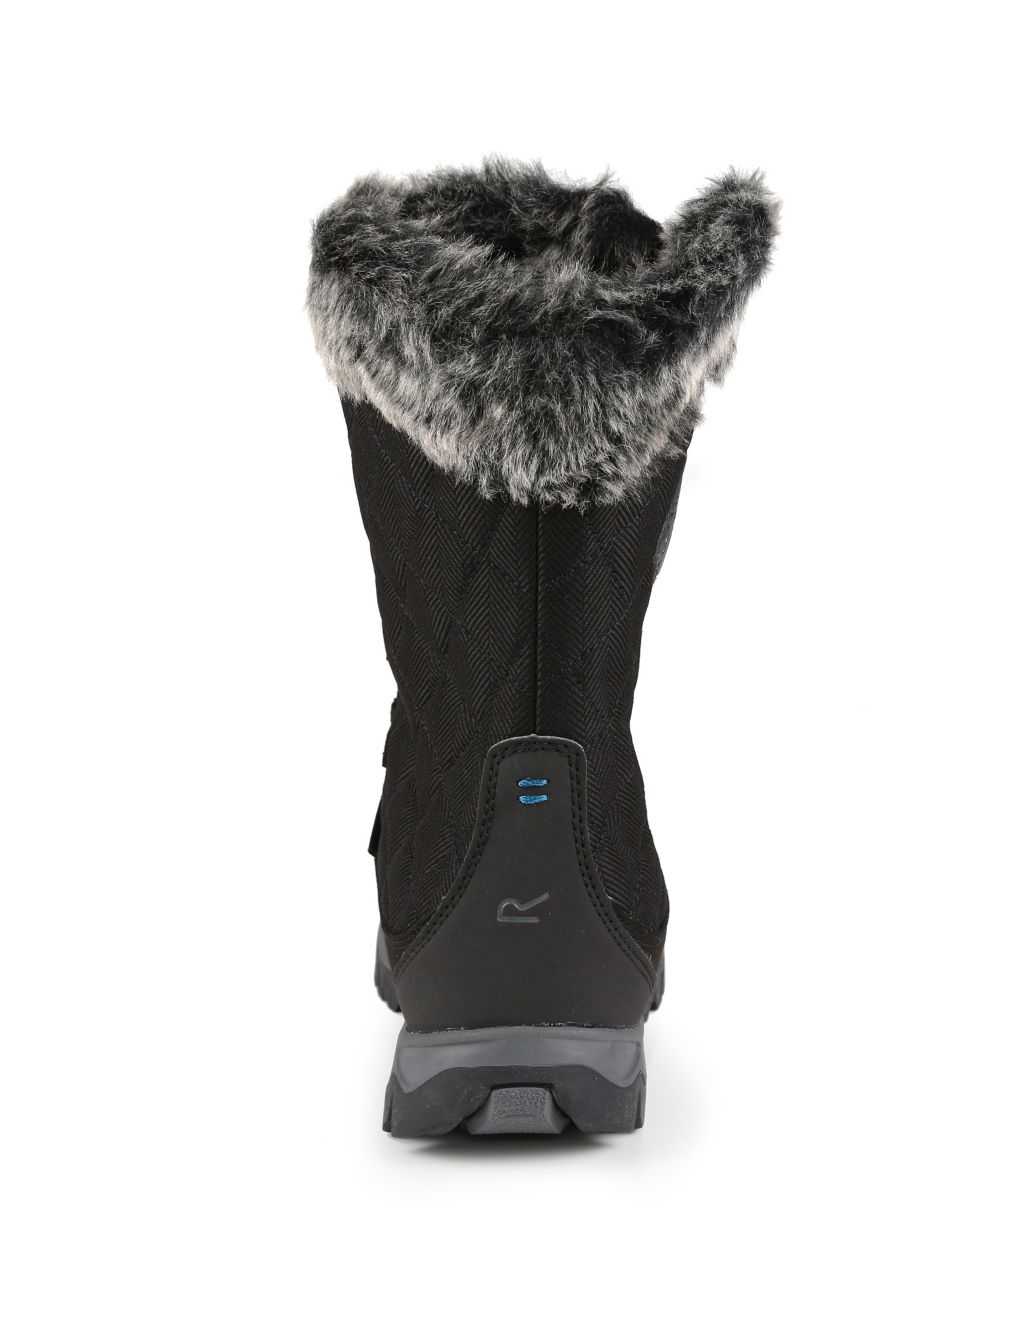 Lady Newley Thermo Winter Boots image 4